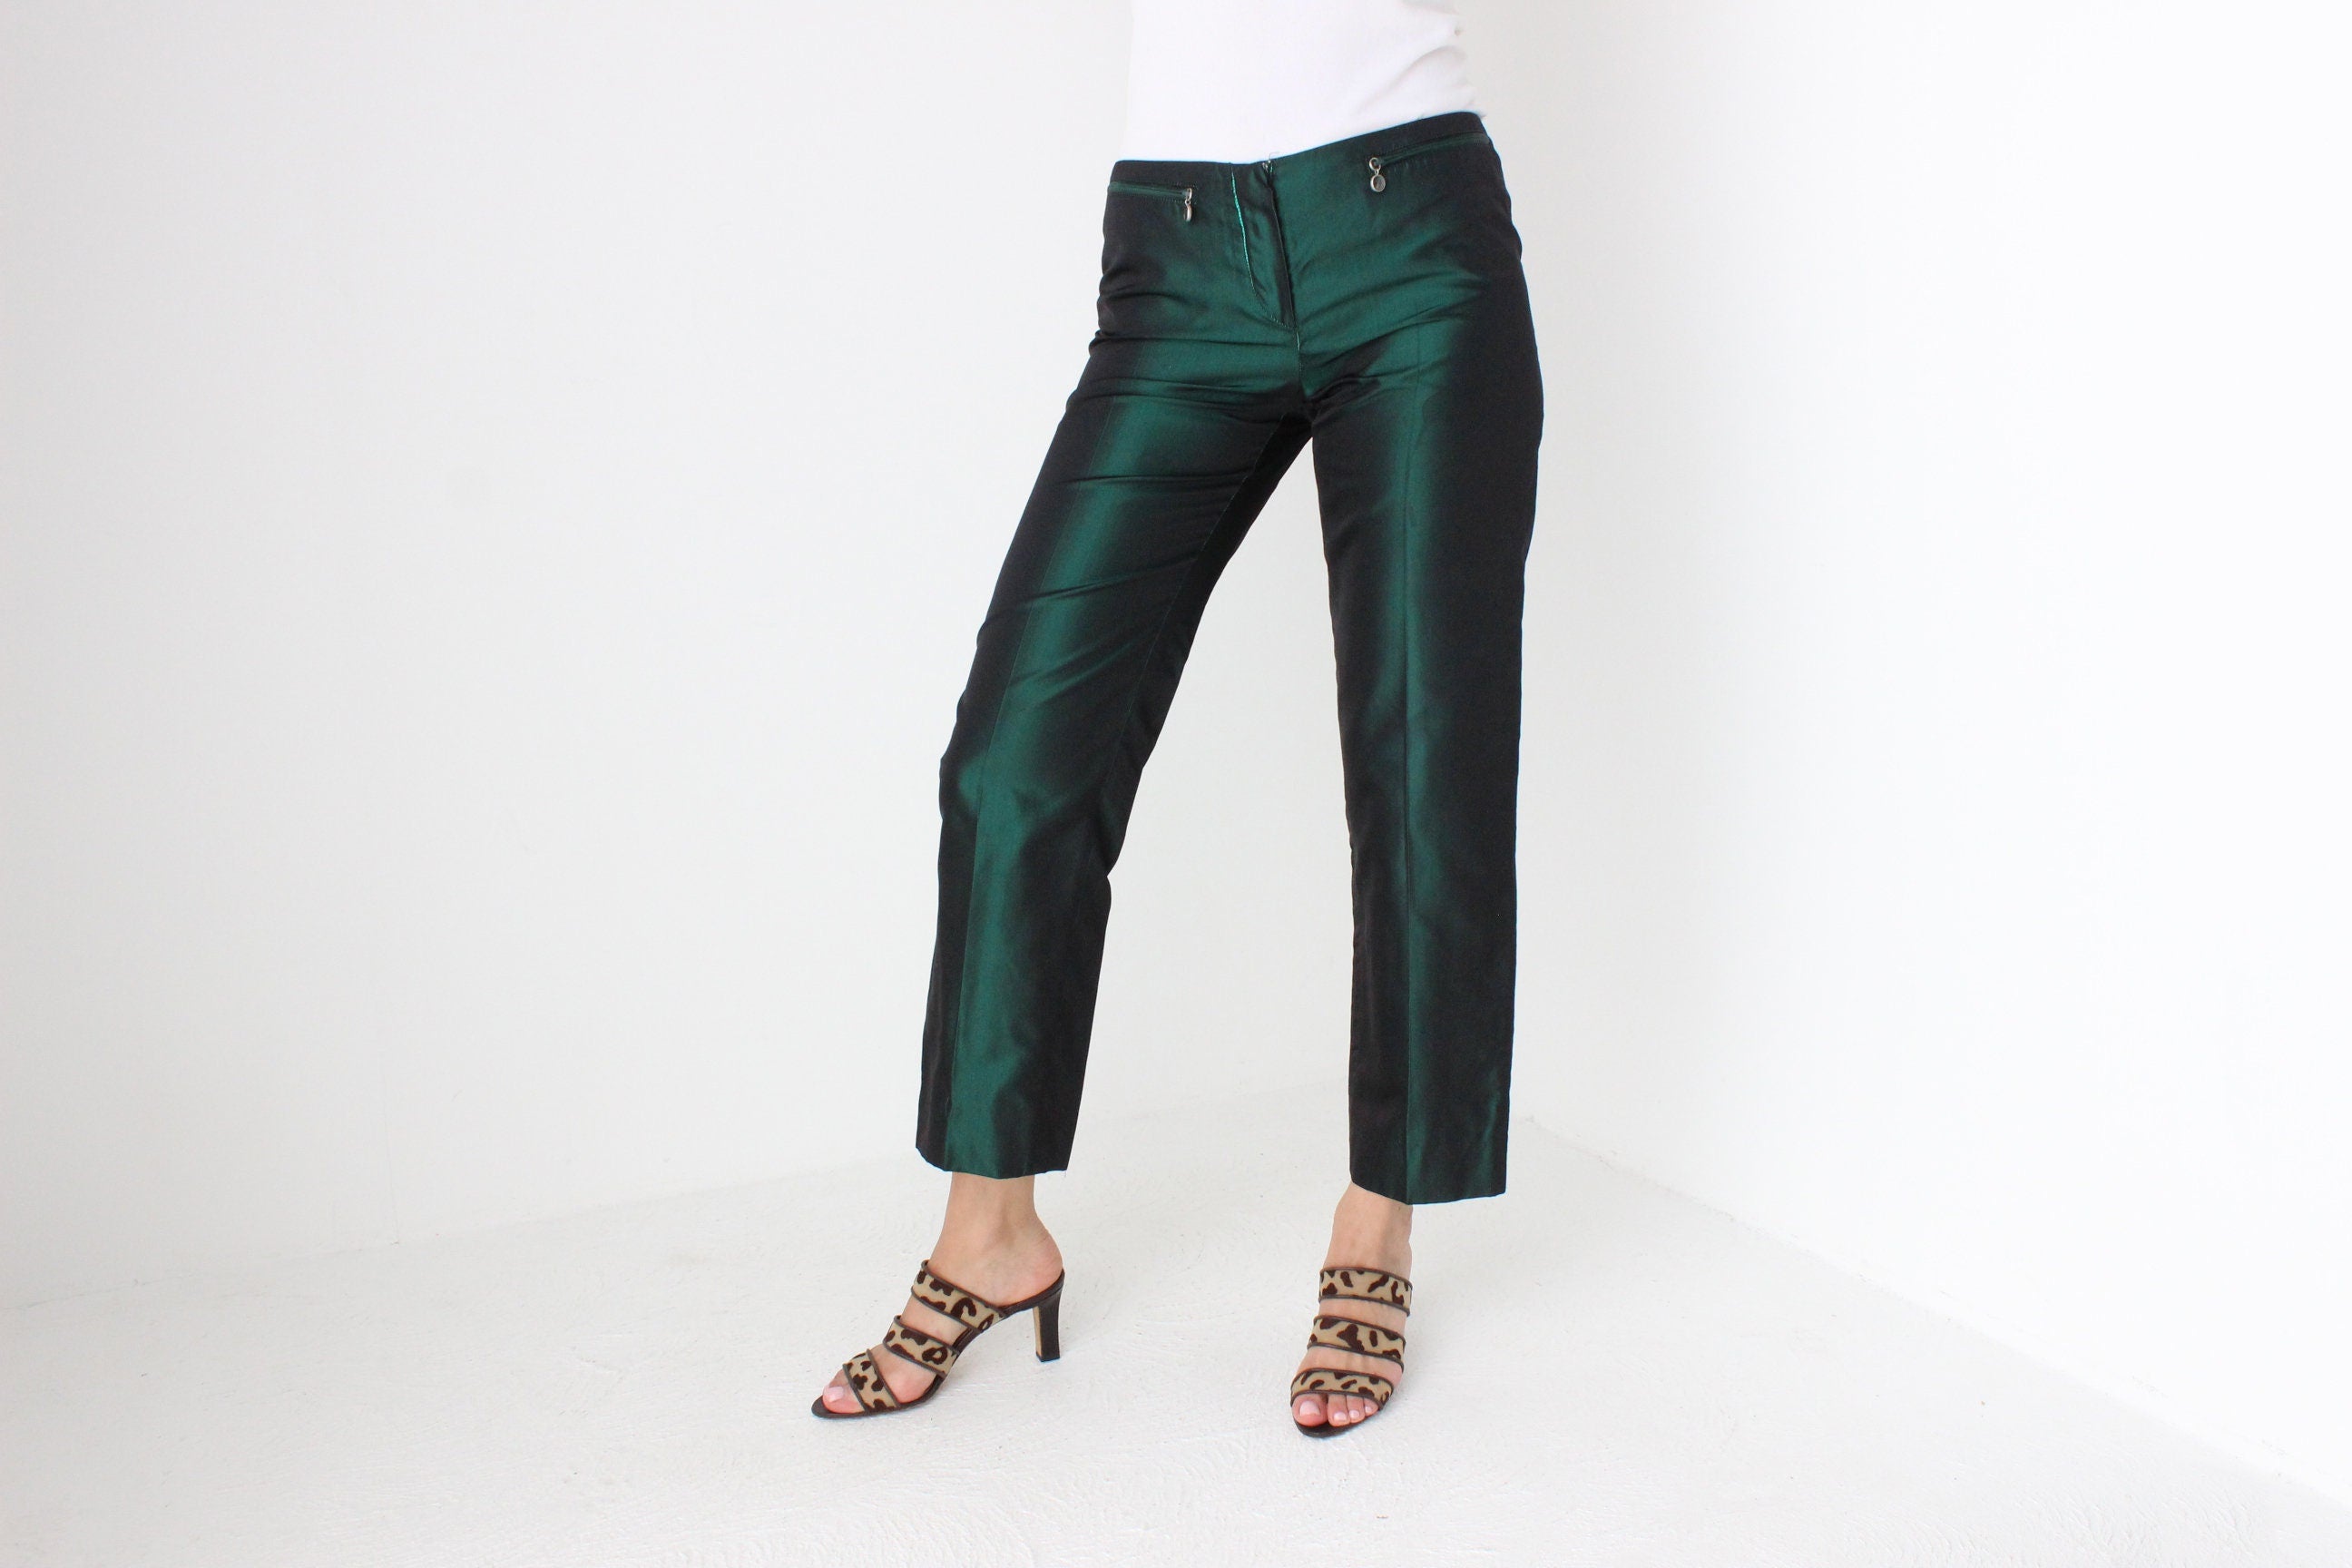 Vintage 2000s GUCCI by Tom Ford Metallic Green SILK Cropped Pants